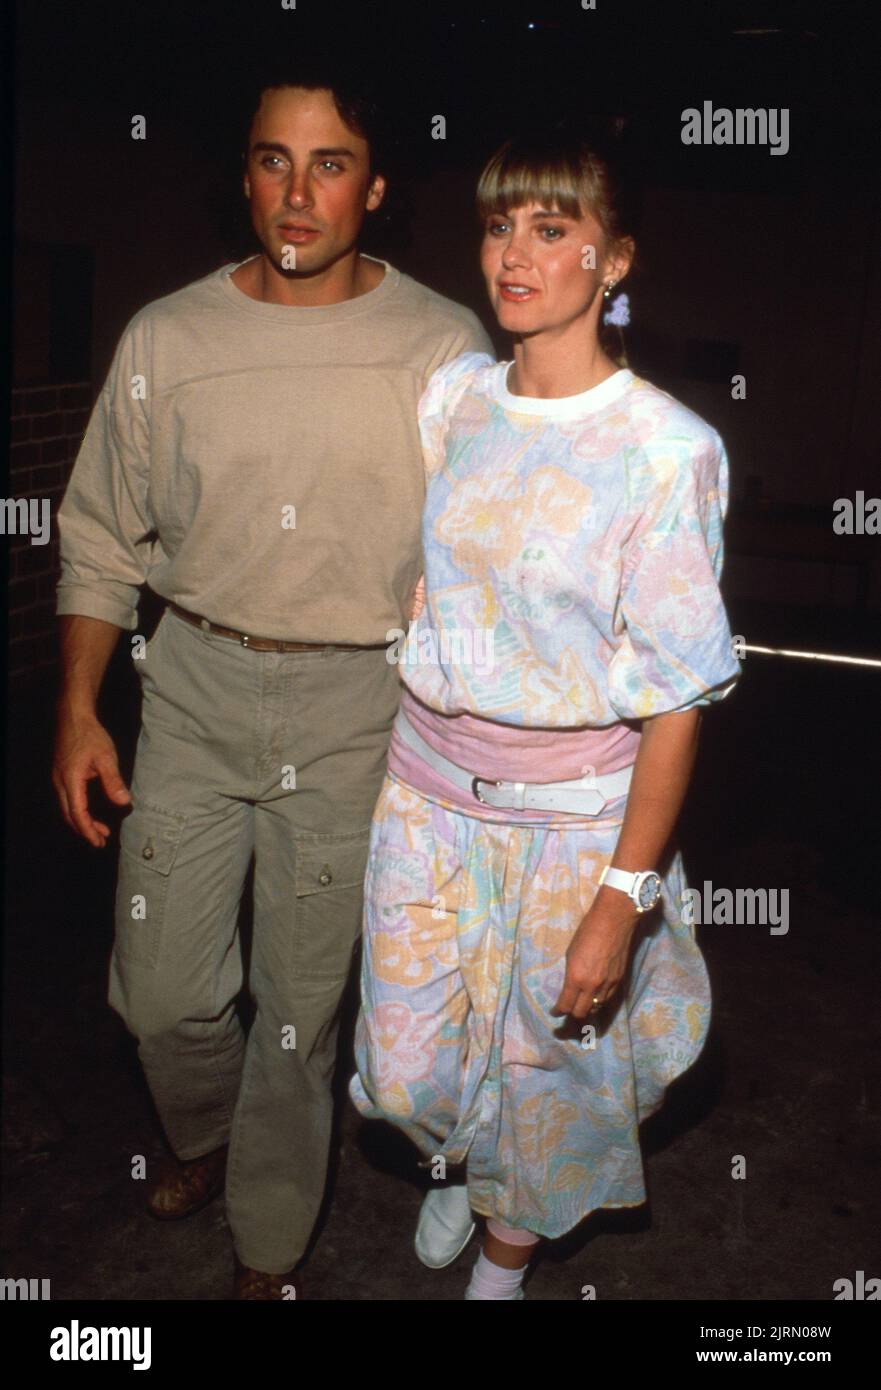 Olivia Newton-John and Matt Lattanzi at the 12th Annual Great Coldwater Canyon Chili Cook off to Benefit St. Michael's and All Angels School on May 7, 1988 at St. Michael's and All Angels School in Studio City, CaliforniaCredit: Ralph Dominguez/MediaPunch Stock Photo